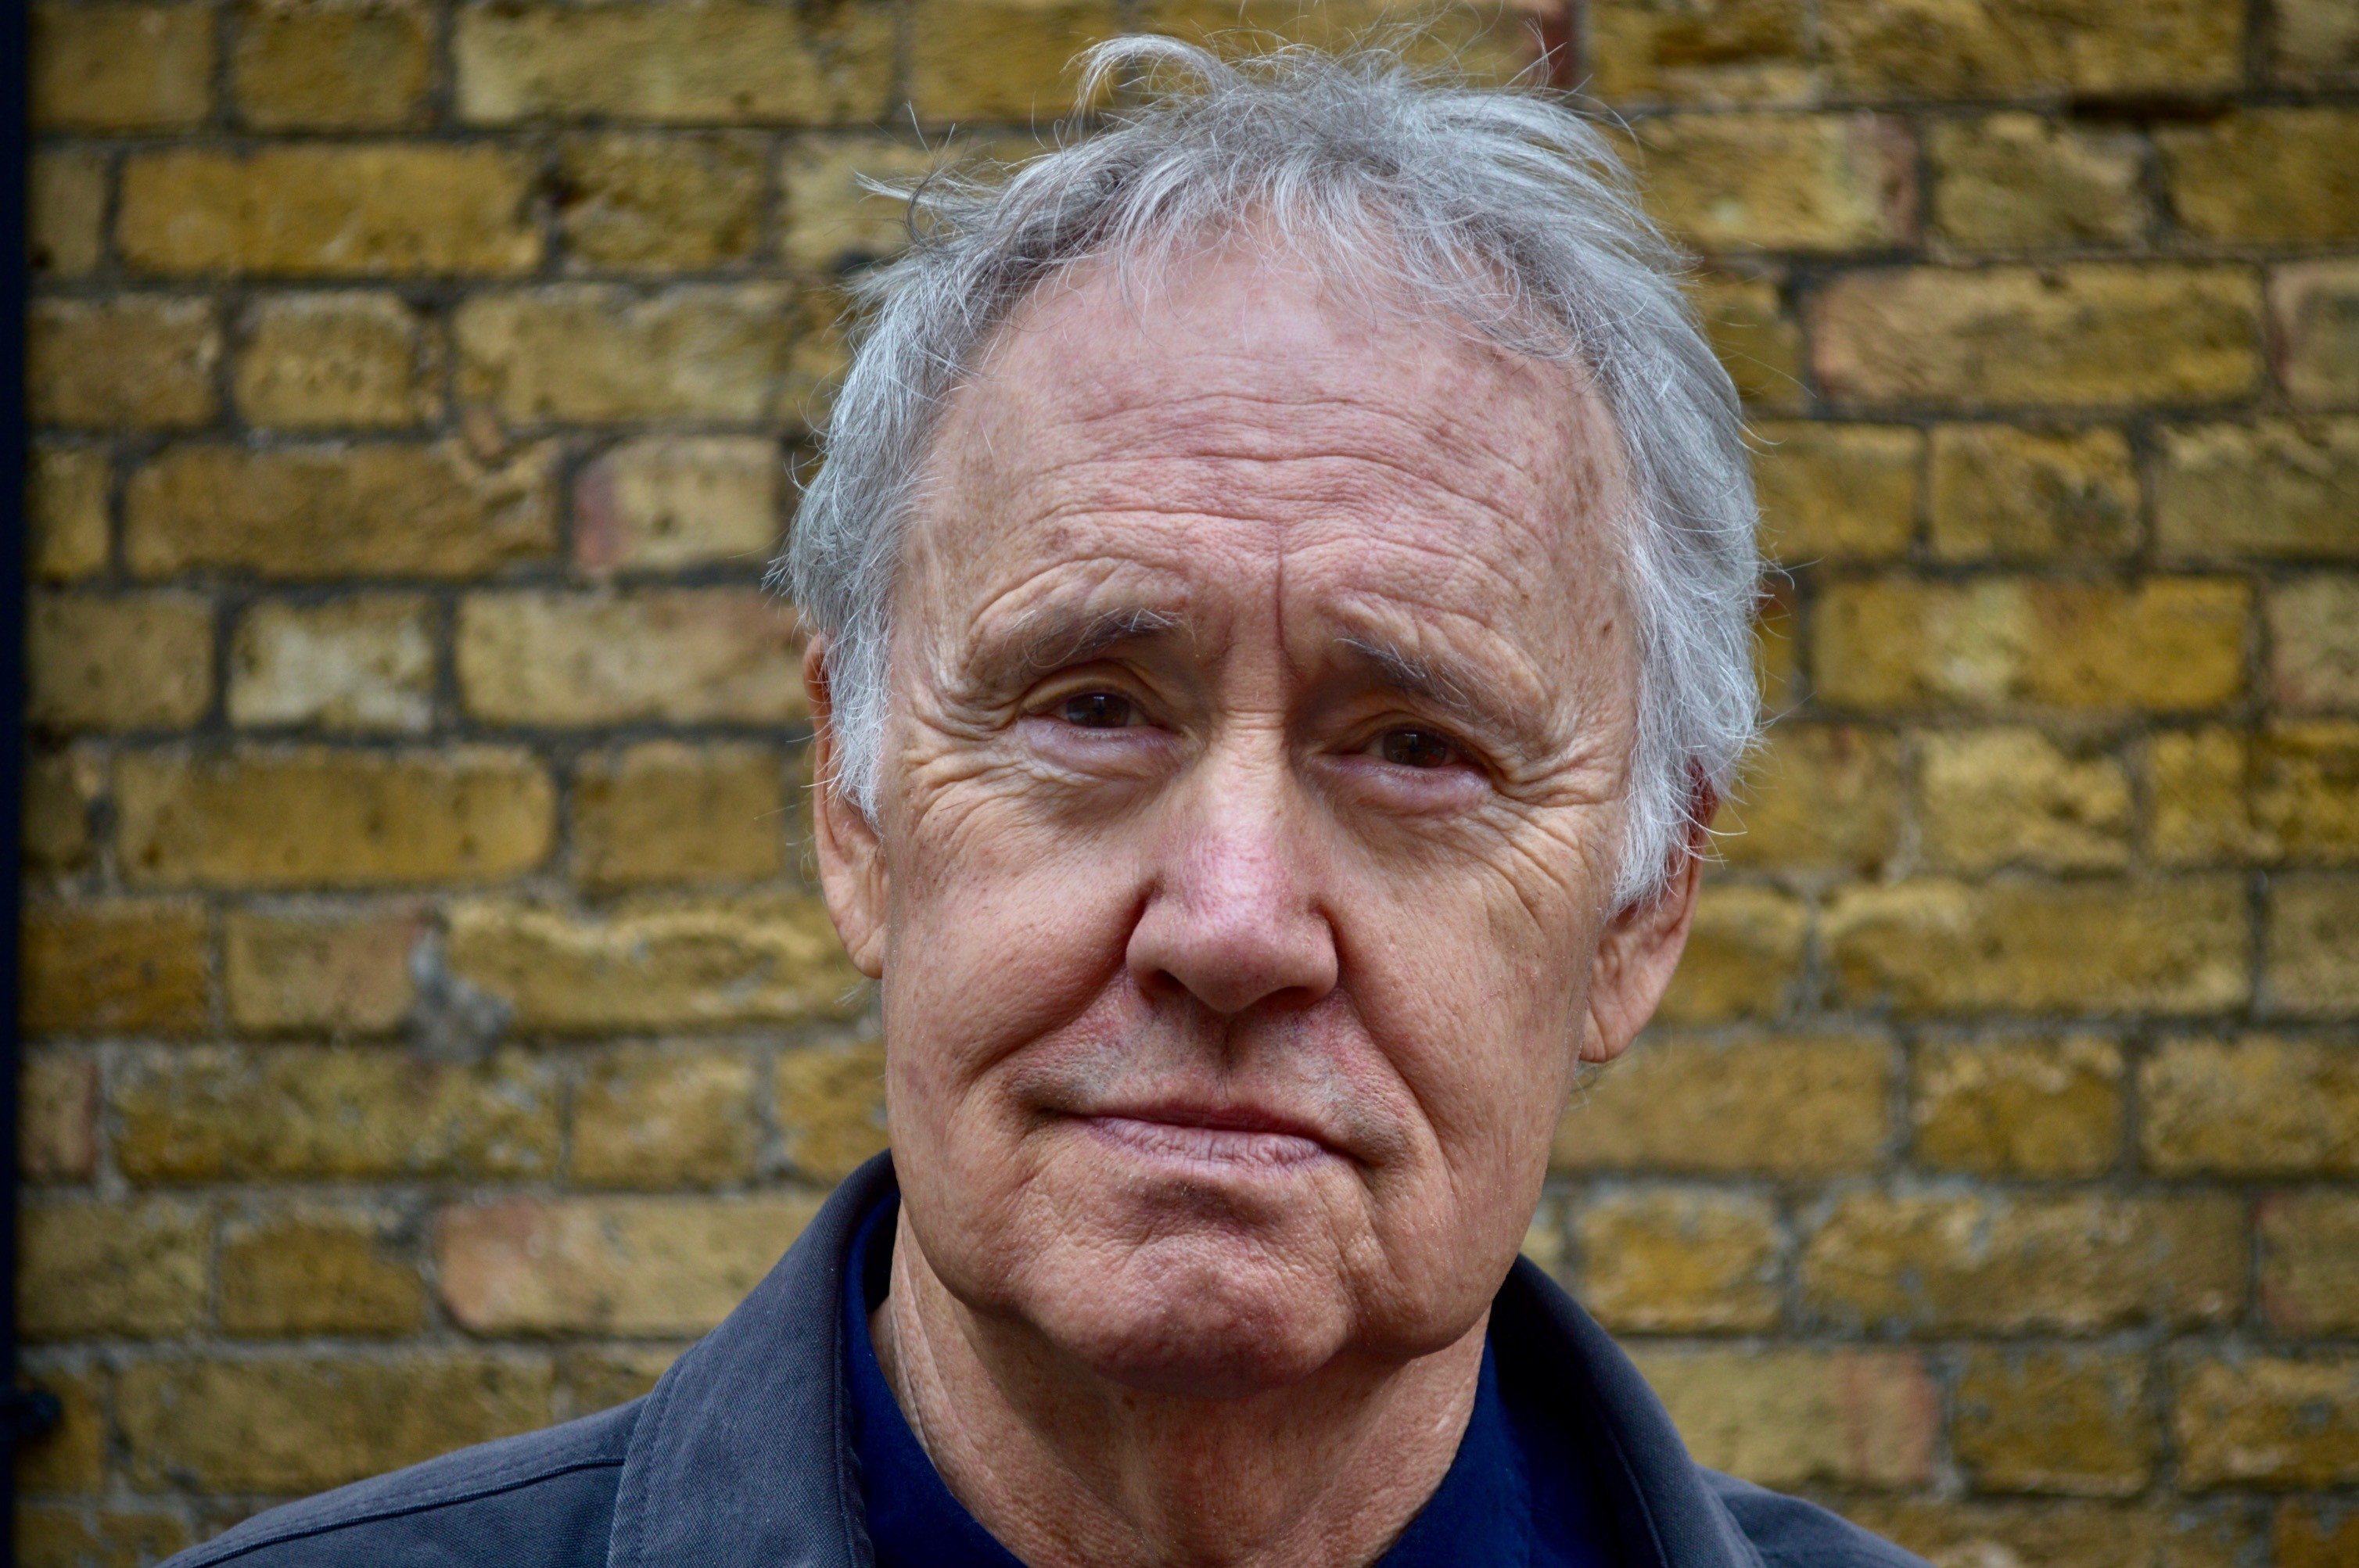 Headshot of Nigel Planer standing in front of a brick wall.